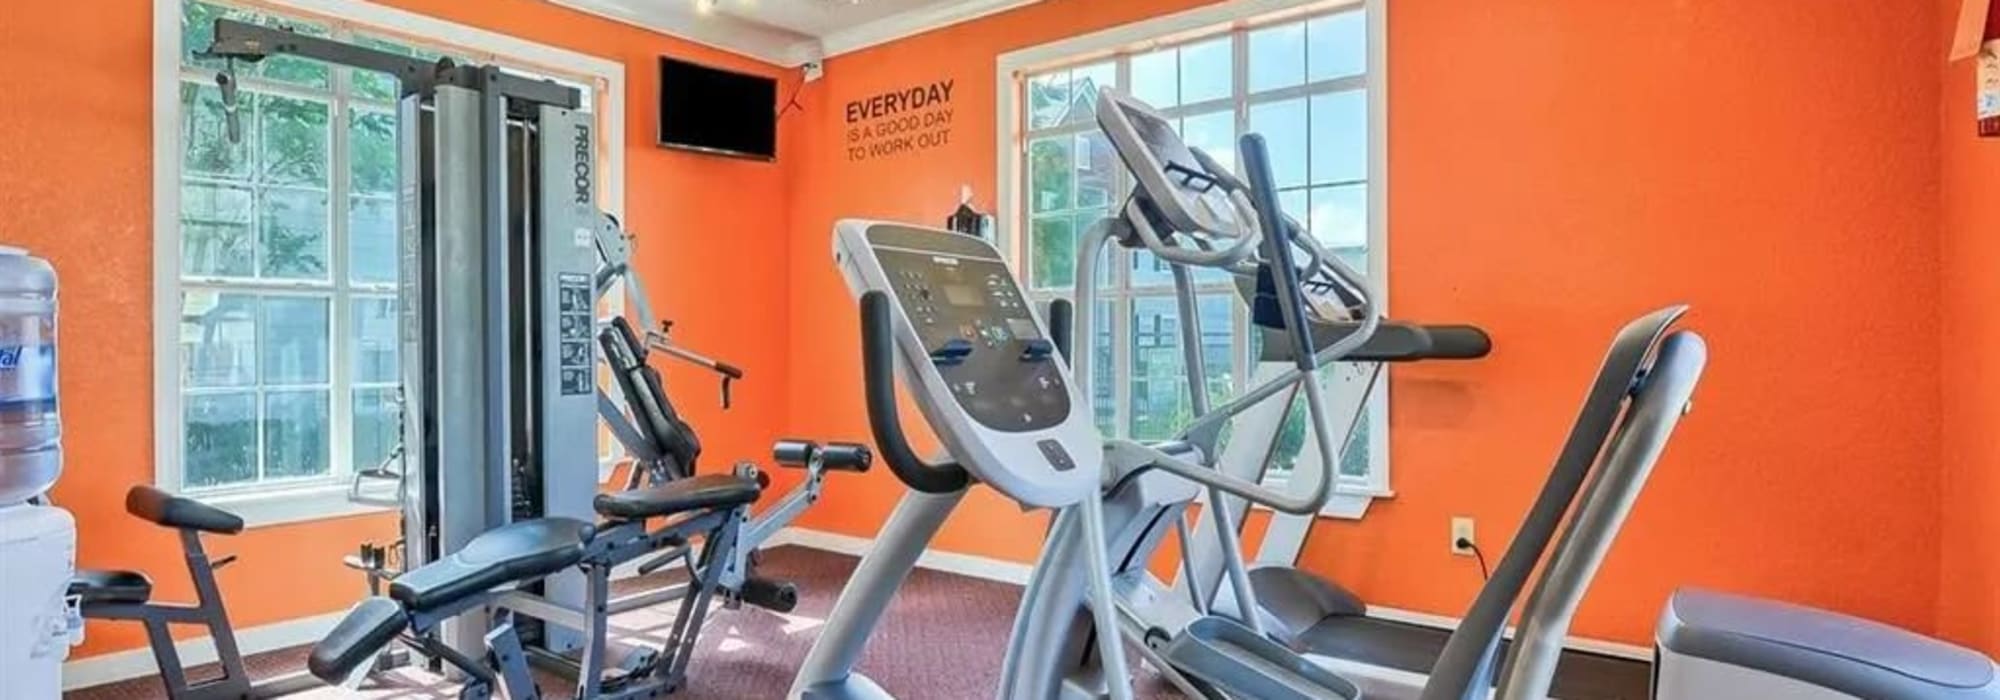 Exercise equipment in the fitness center at Reserve at Stillwater in Durham, North Carolina